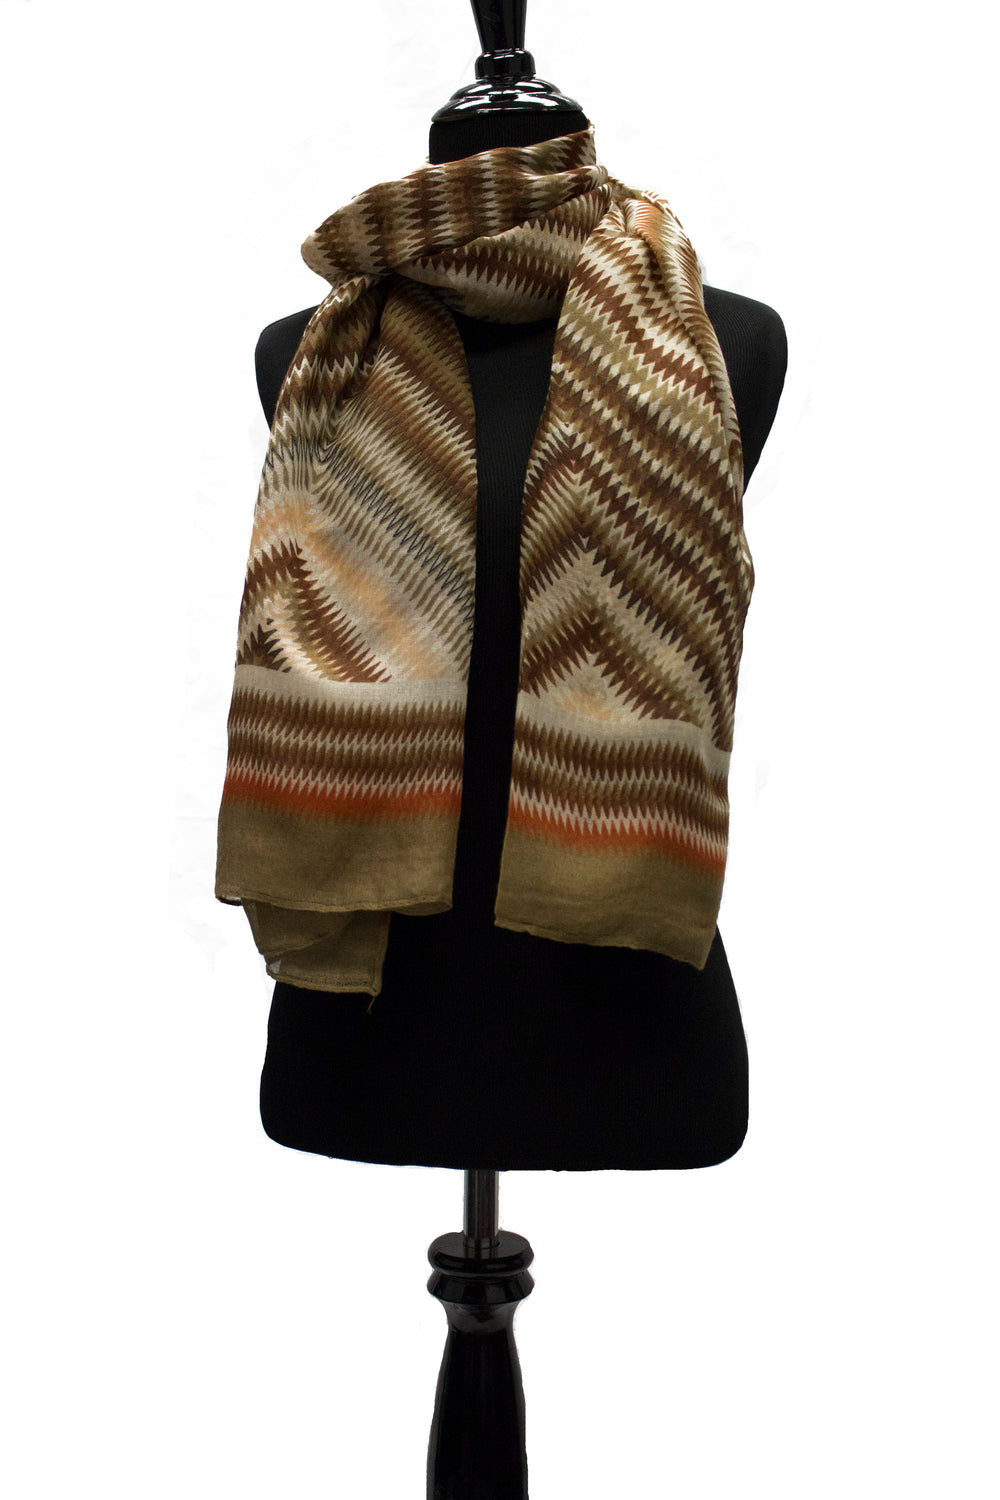 chevron print hijab in brown with a touch of yellow red and tan